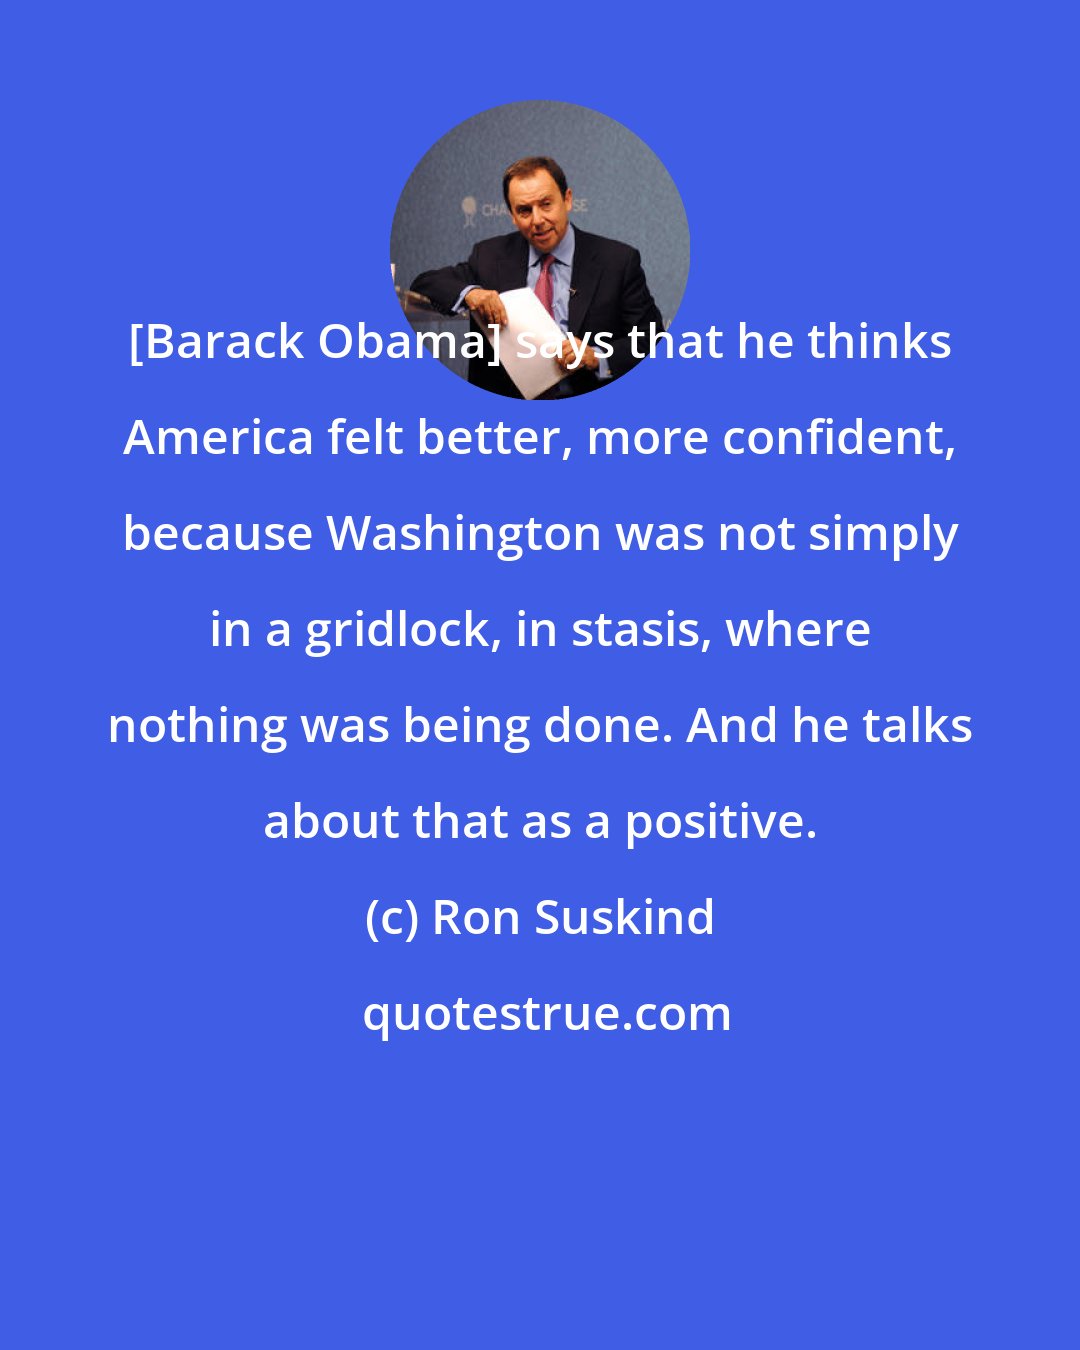 Ron Suskind: [Barack Obama] says that he thinks America felt better, more confident, because Washington was not simply in a gridlock, in stasis, where nothing was being done. And he talks about that as a positive.